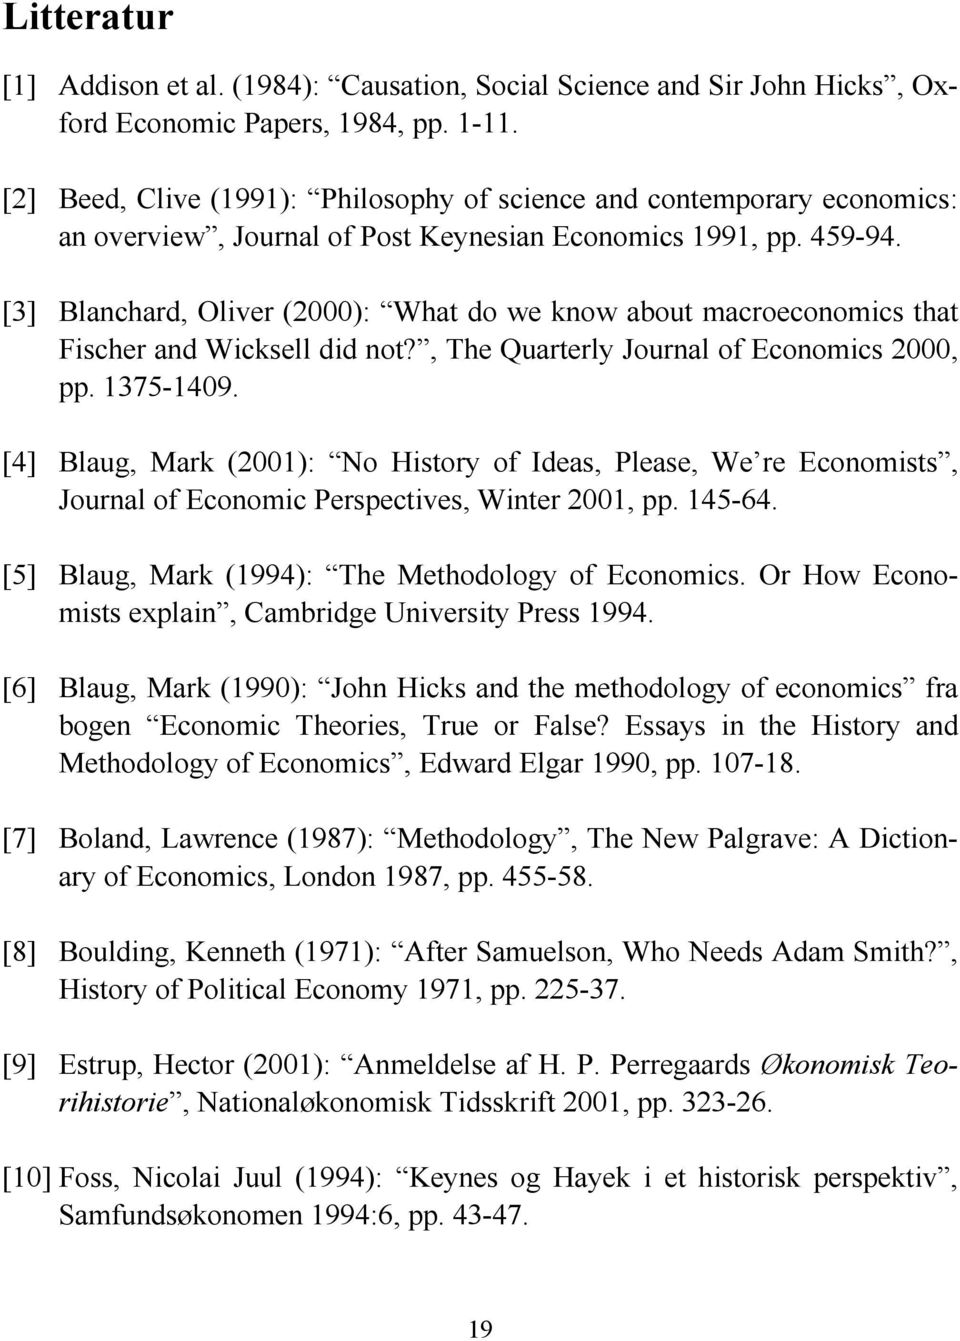 [3] Blanchard, Oliver (2000): What do we know about macroeconomics that Fischer and Wicksell did not?, The Quarterly Journal of Economics 2000, pp. 1375-1409.